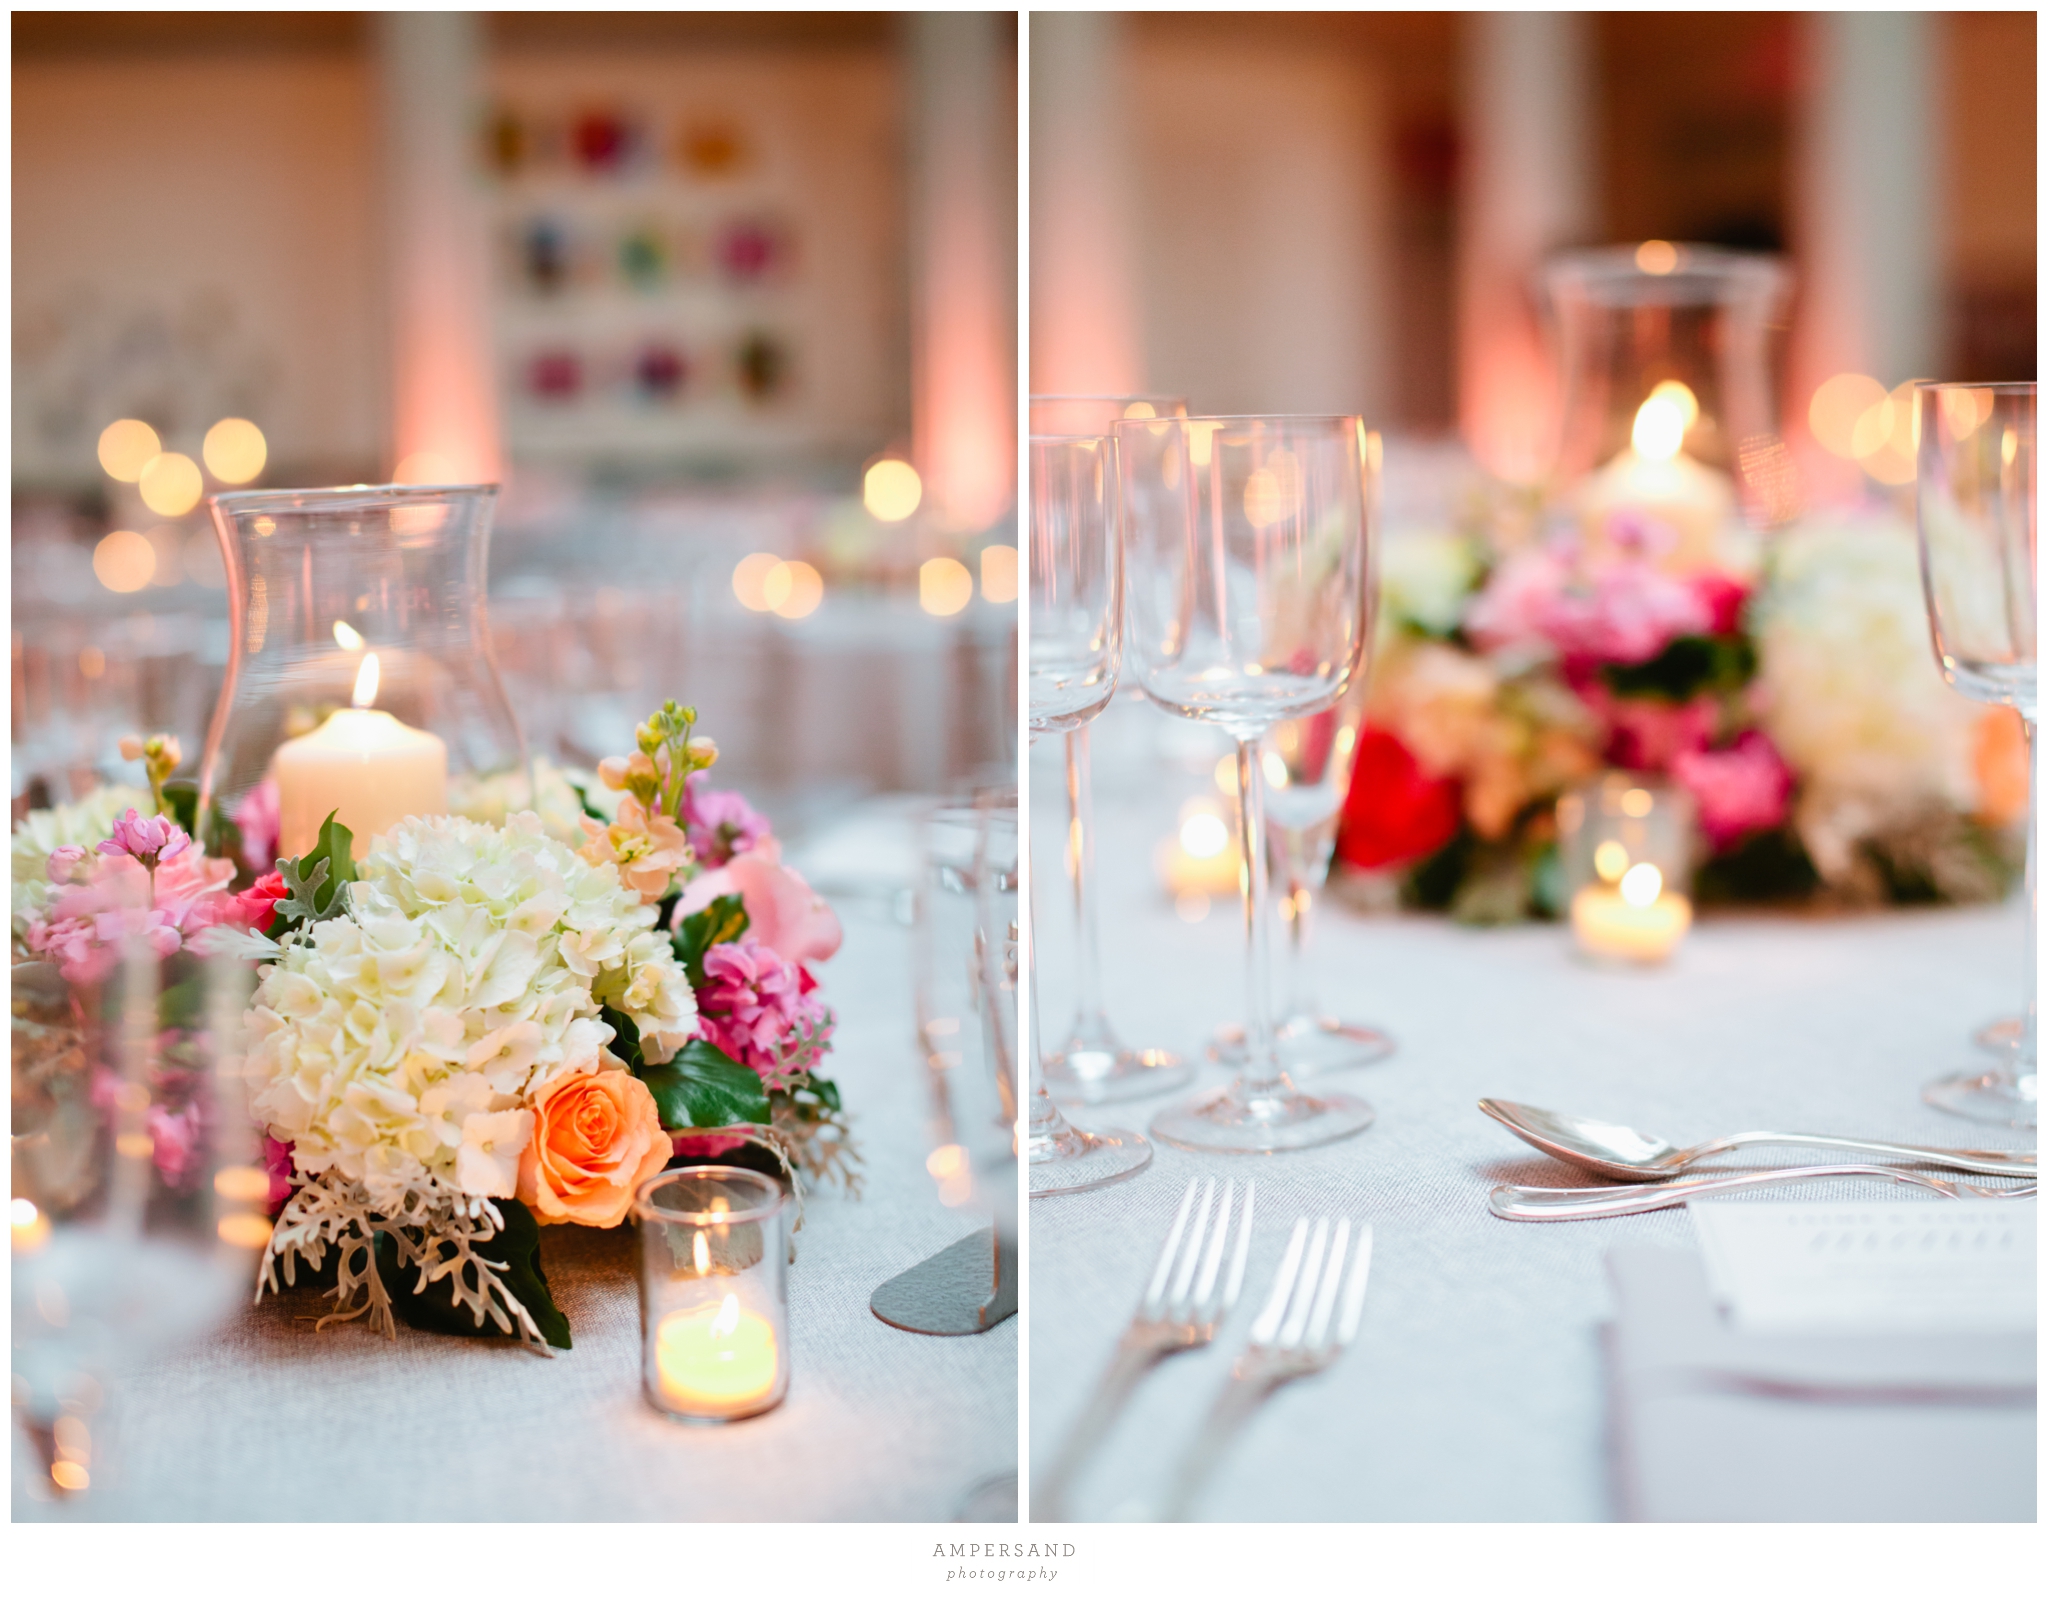 Wedding Reception Corcoran Gallery of Art  // Photos by Ampersand Photography